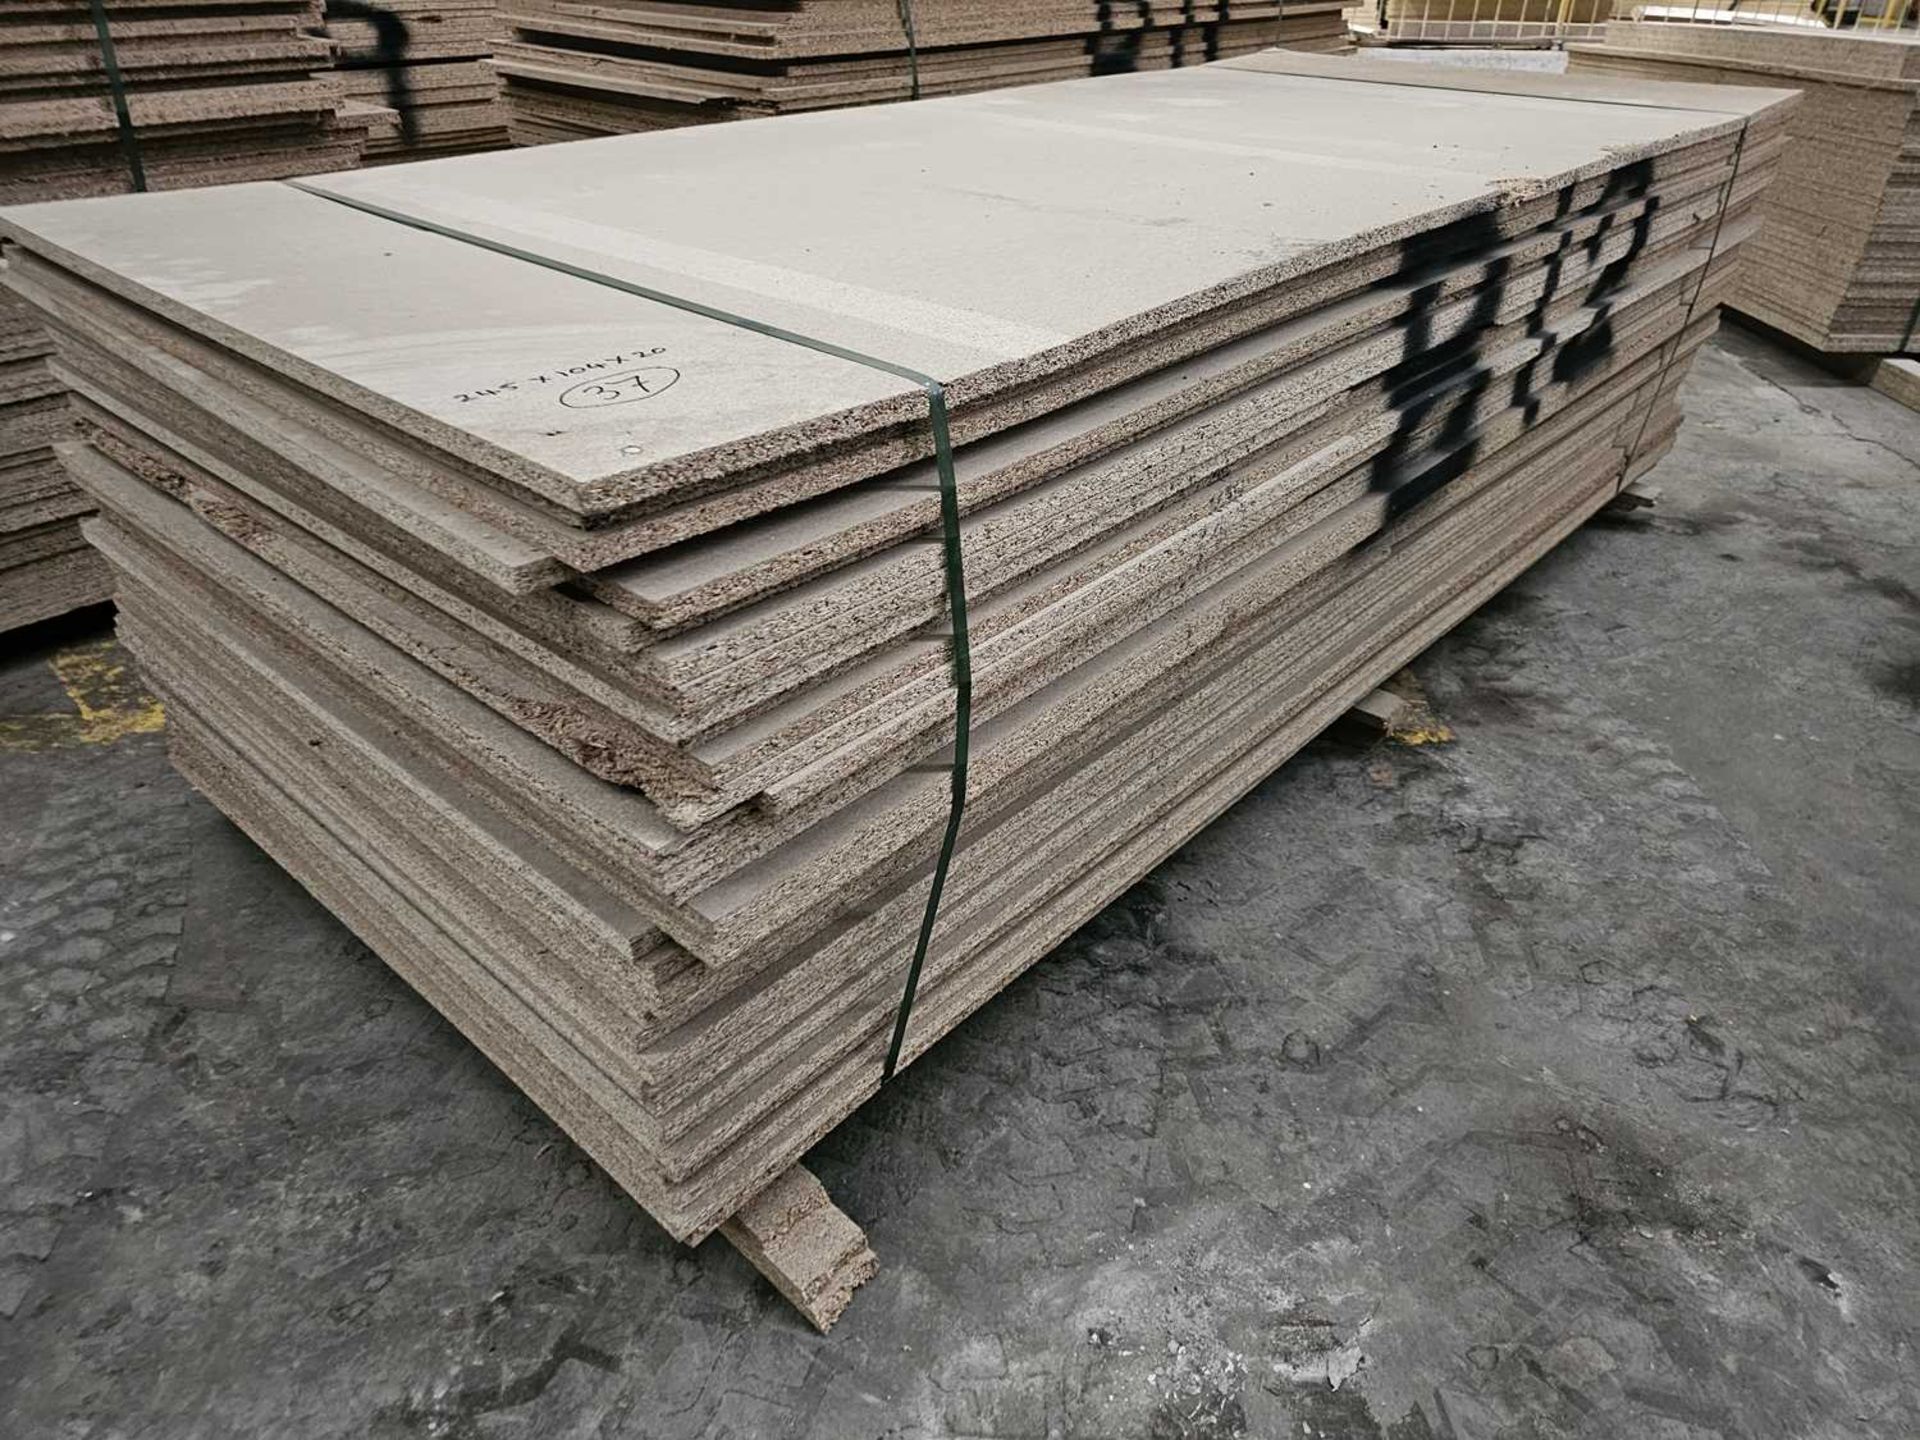 Selection of Chip Board Sheets (245cm x 104cm x 20mm - 37 of)